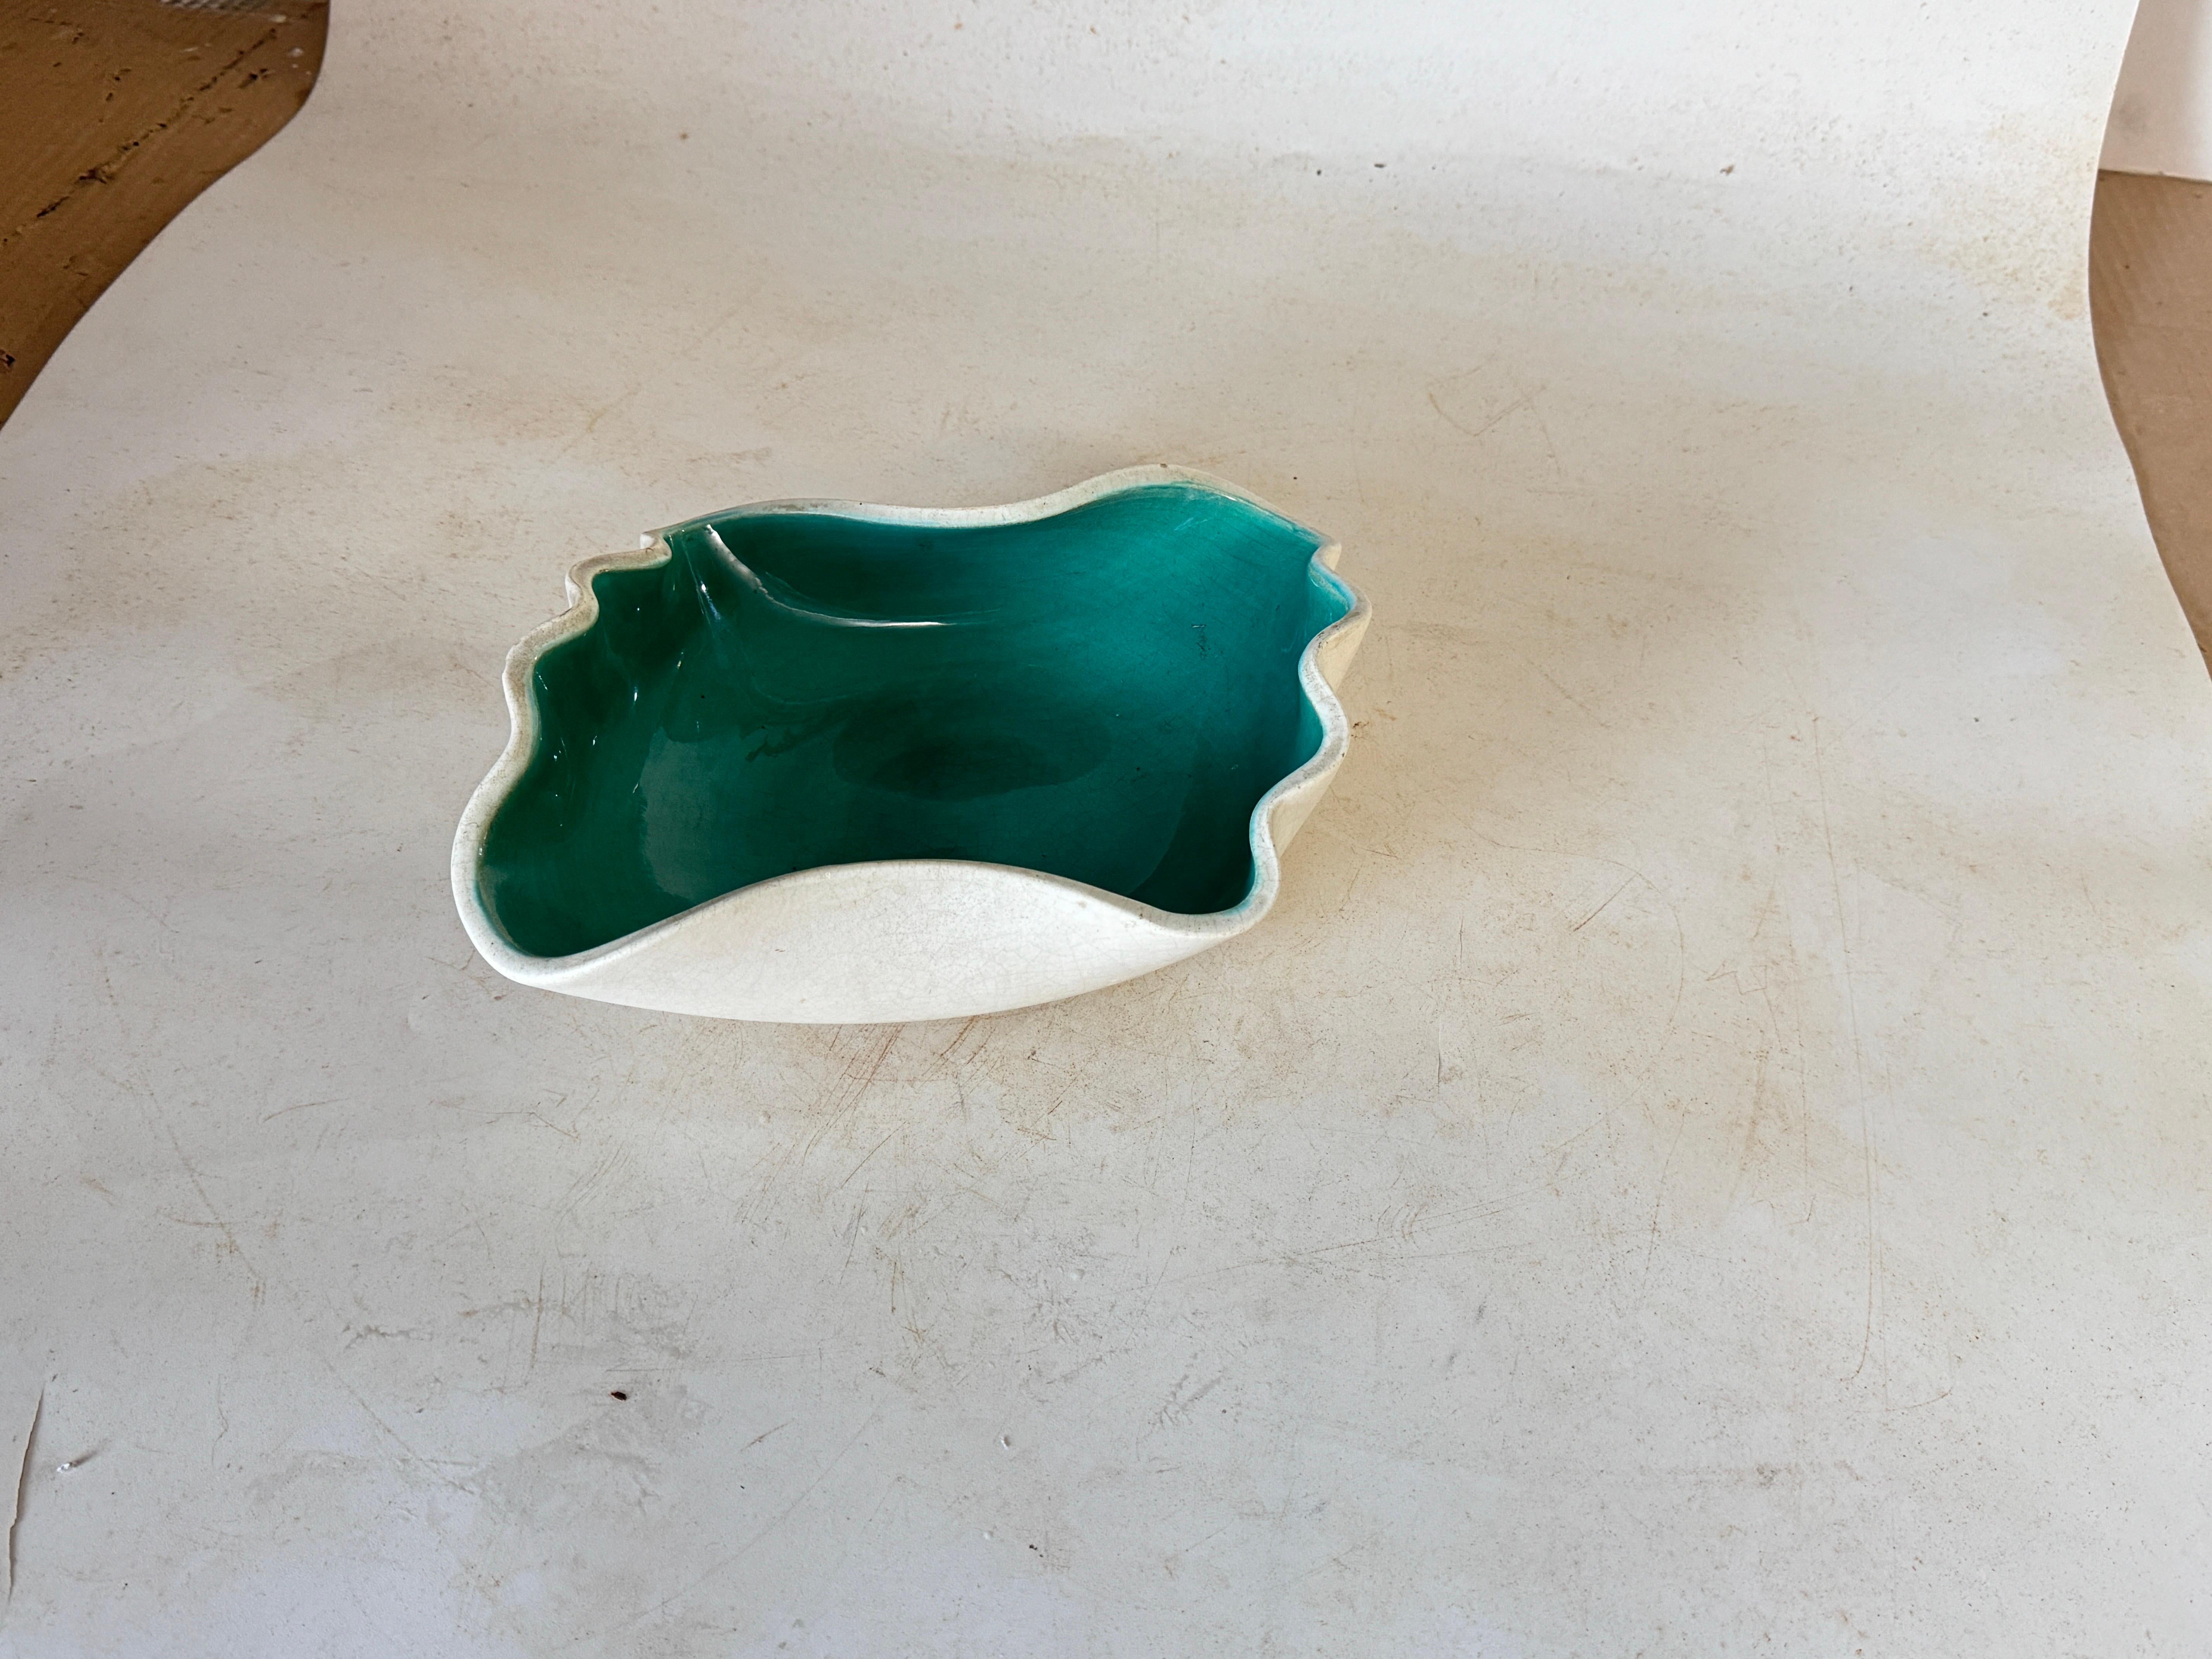 Mid-Century French Decorative Ceramic Dish / Vide-Poche by Elchinger 1960s Green For Sale 2